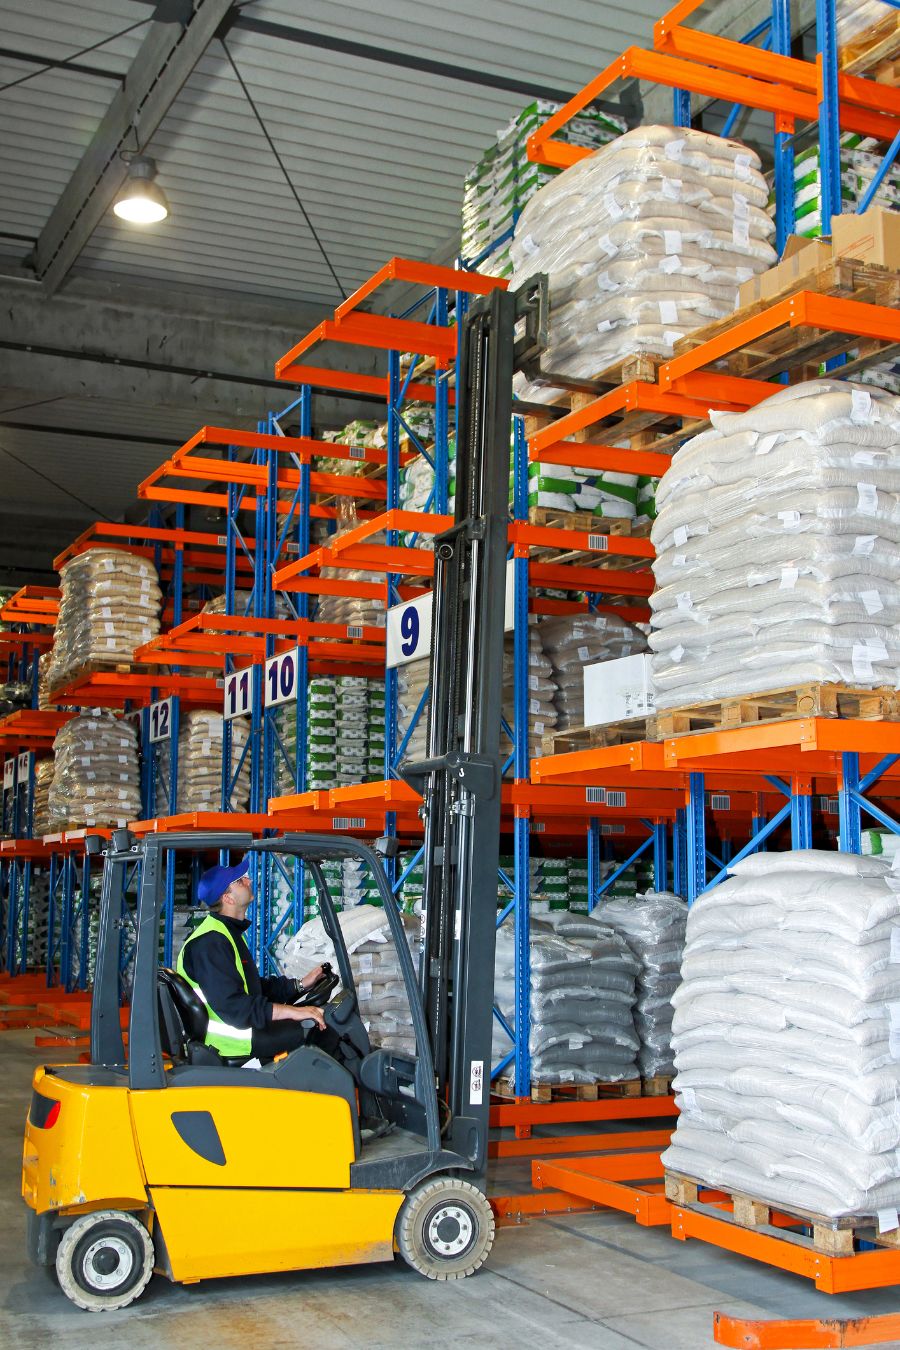 Forklift truck in a warehouse